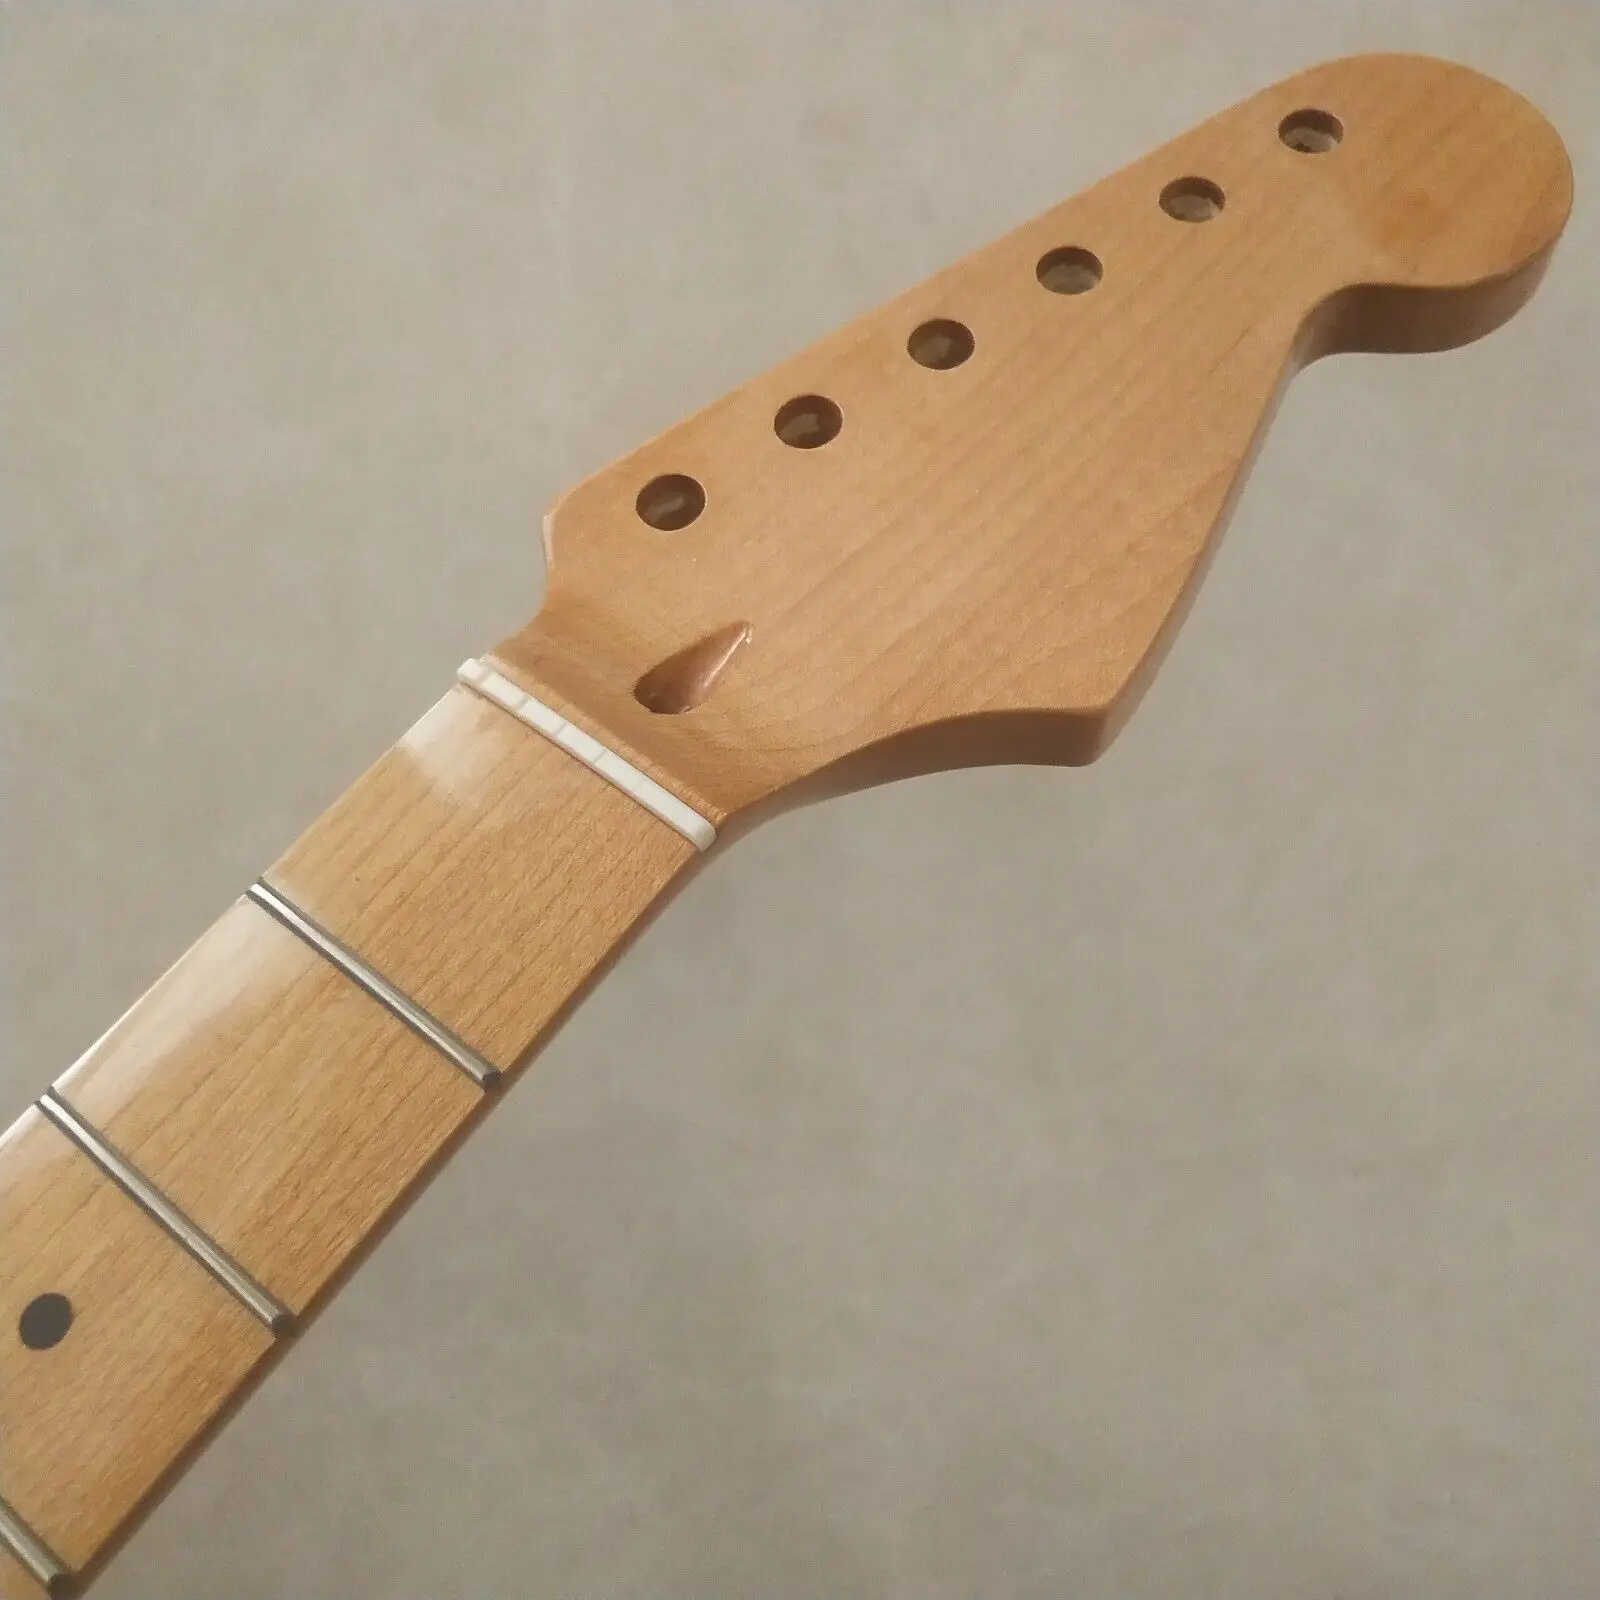 Roasted Maple Guitar Neck 22 Fret 25.5 Inch Fingerboard Dot Inlay